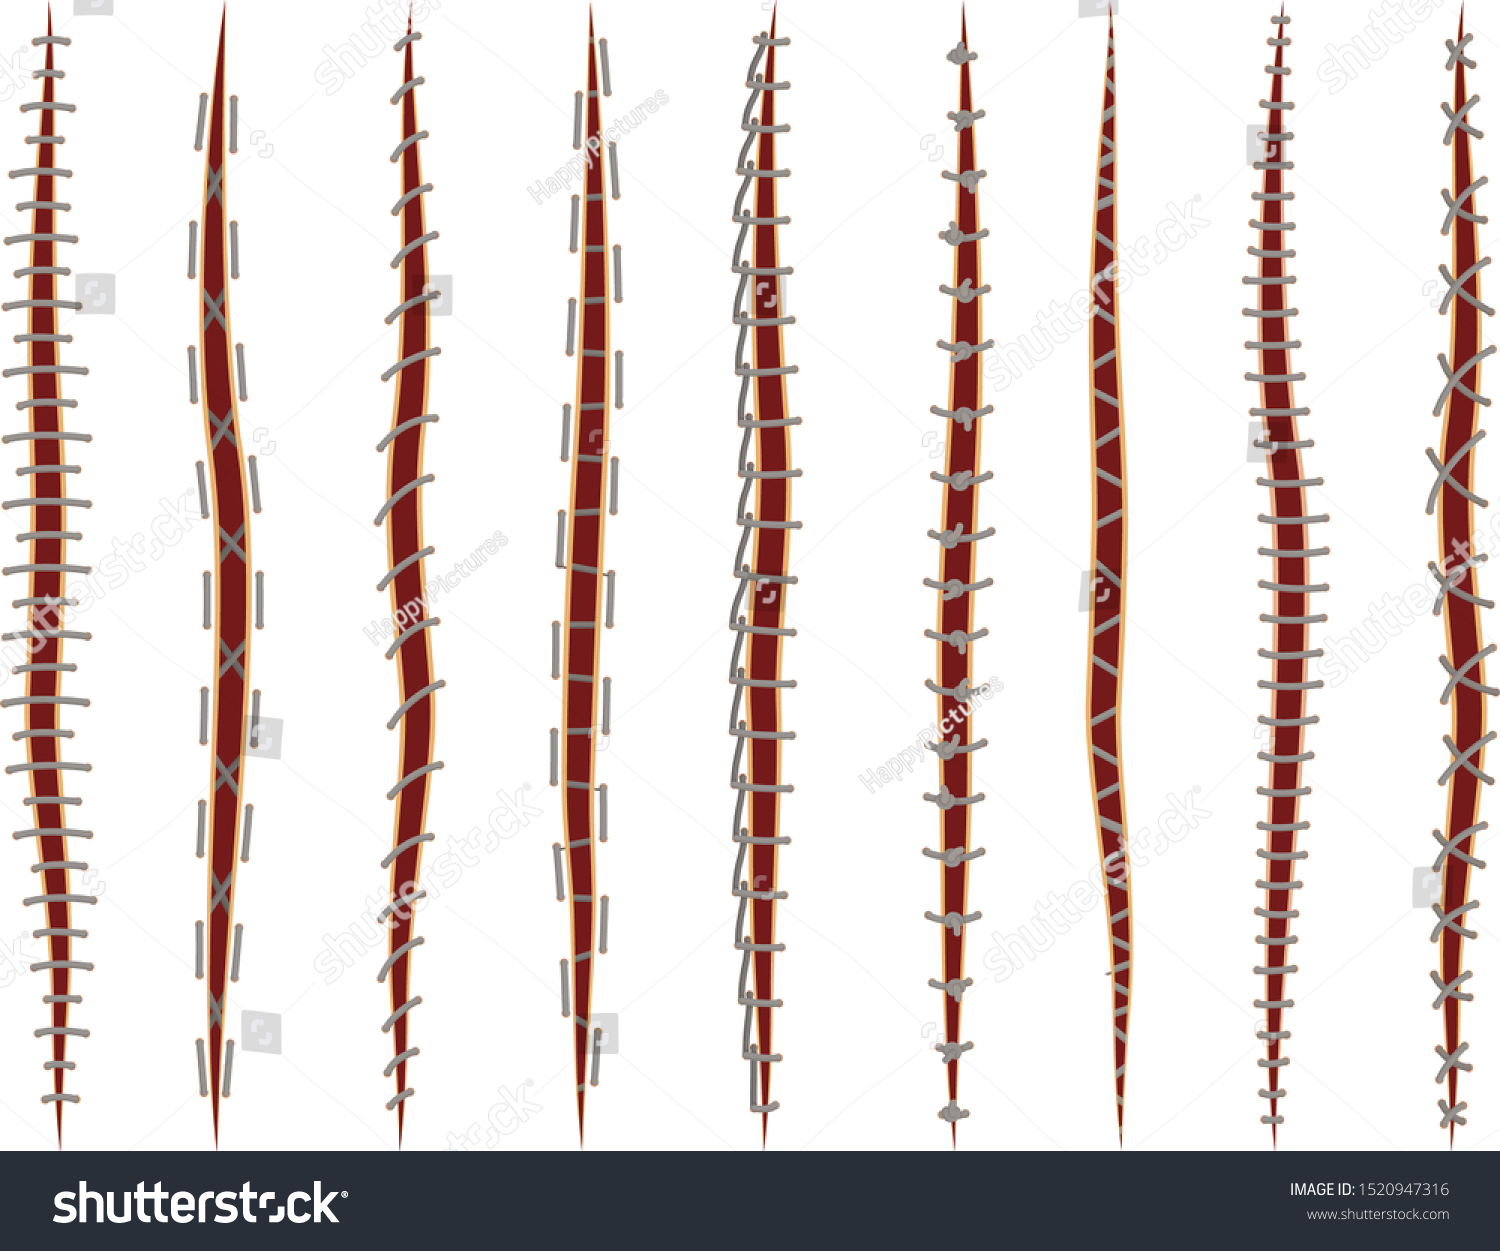 Set Different Illustrations Medical Stitches Injury Stock Vector ...